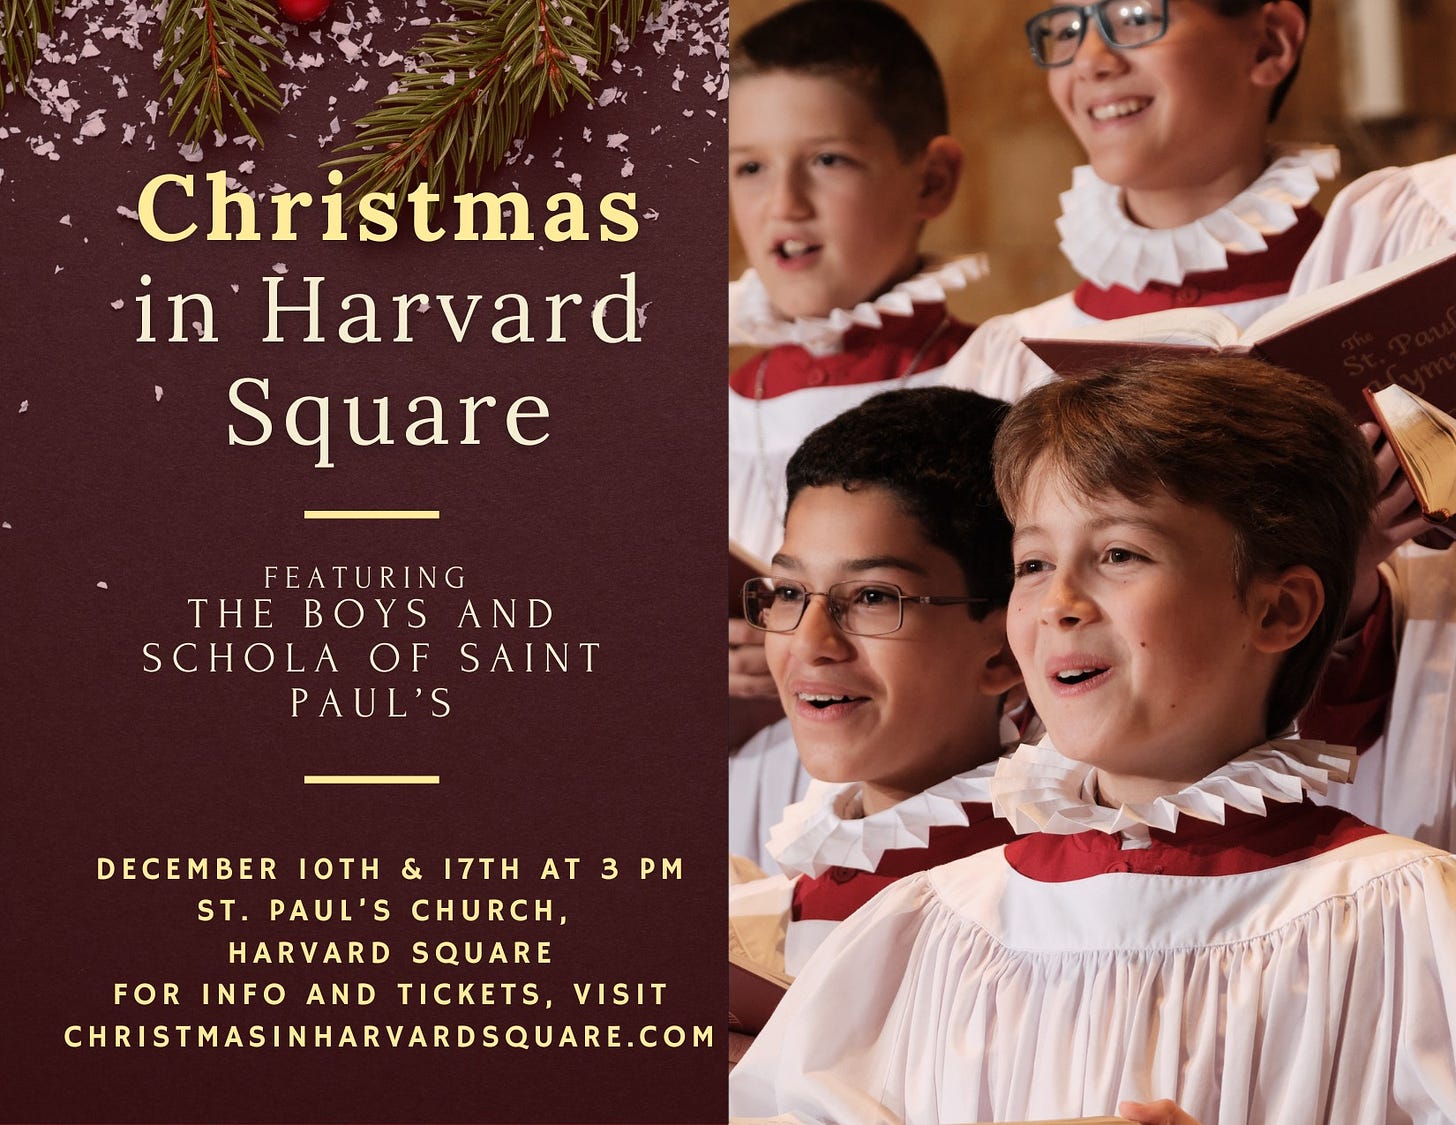 May be an image of 3 people and text that says 'Christmas in Harvard Square FEATURING THE BOYS AND SCHOLA OF SAINT PAUL'S DECEMBER LOTH & 17TH AT 3 PM ST. PAUL'S CHURCH, HARVARD SQUARE FOR INFO AND TICKETS, VISIT CHRISTMASINHARVARDSQUARE.COM'